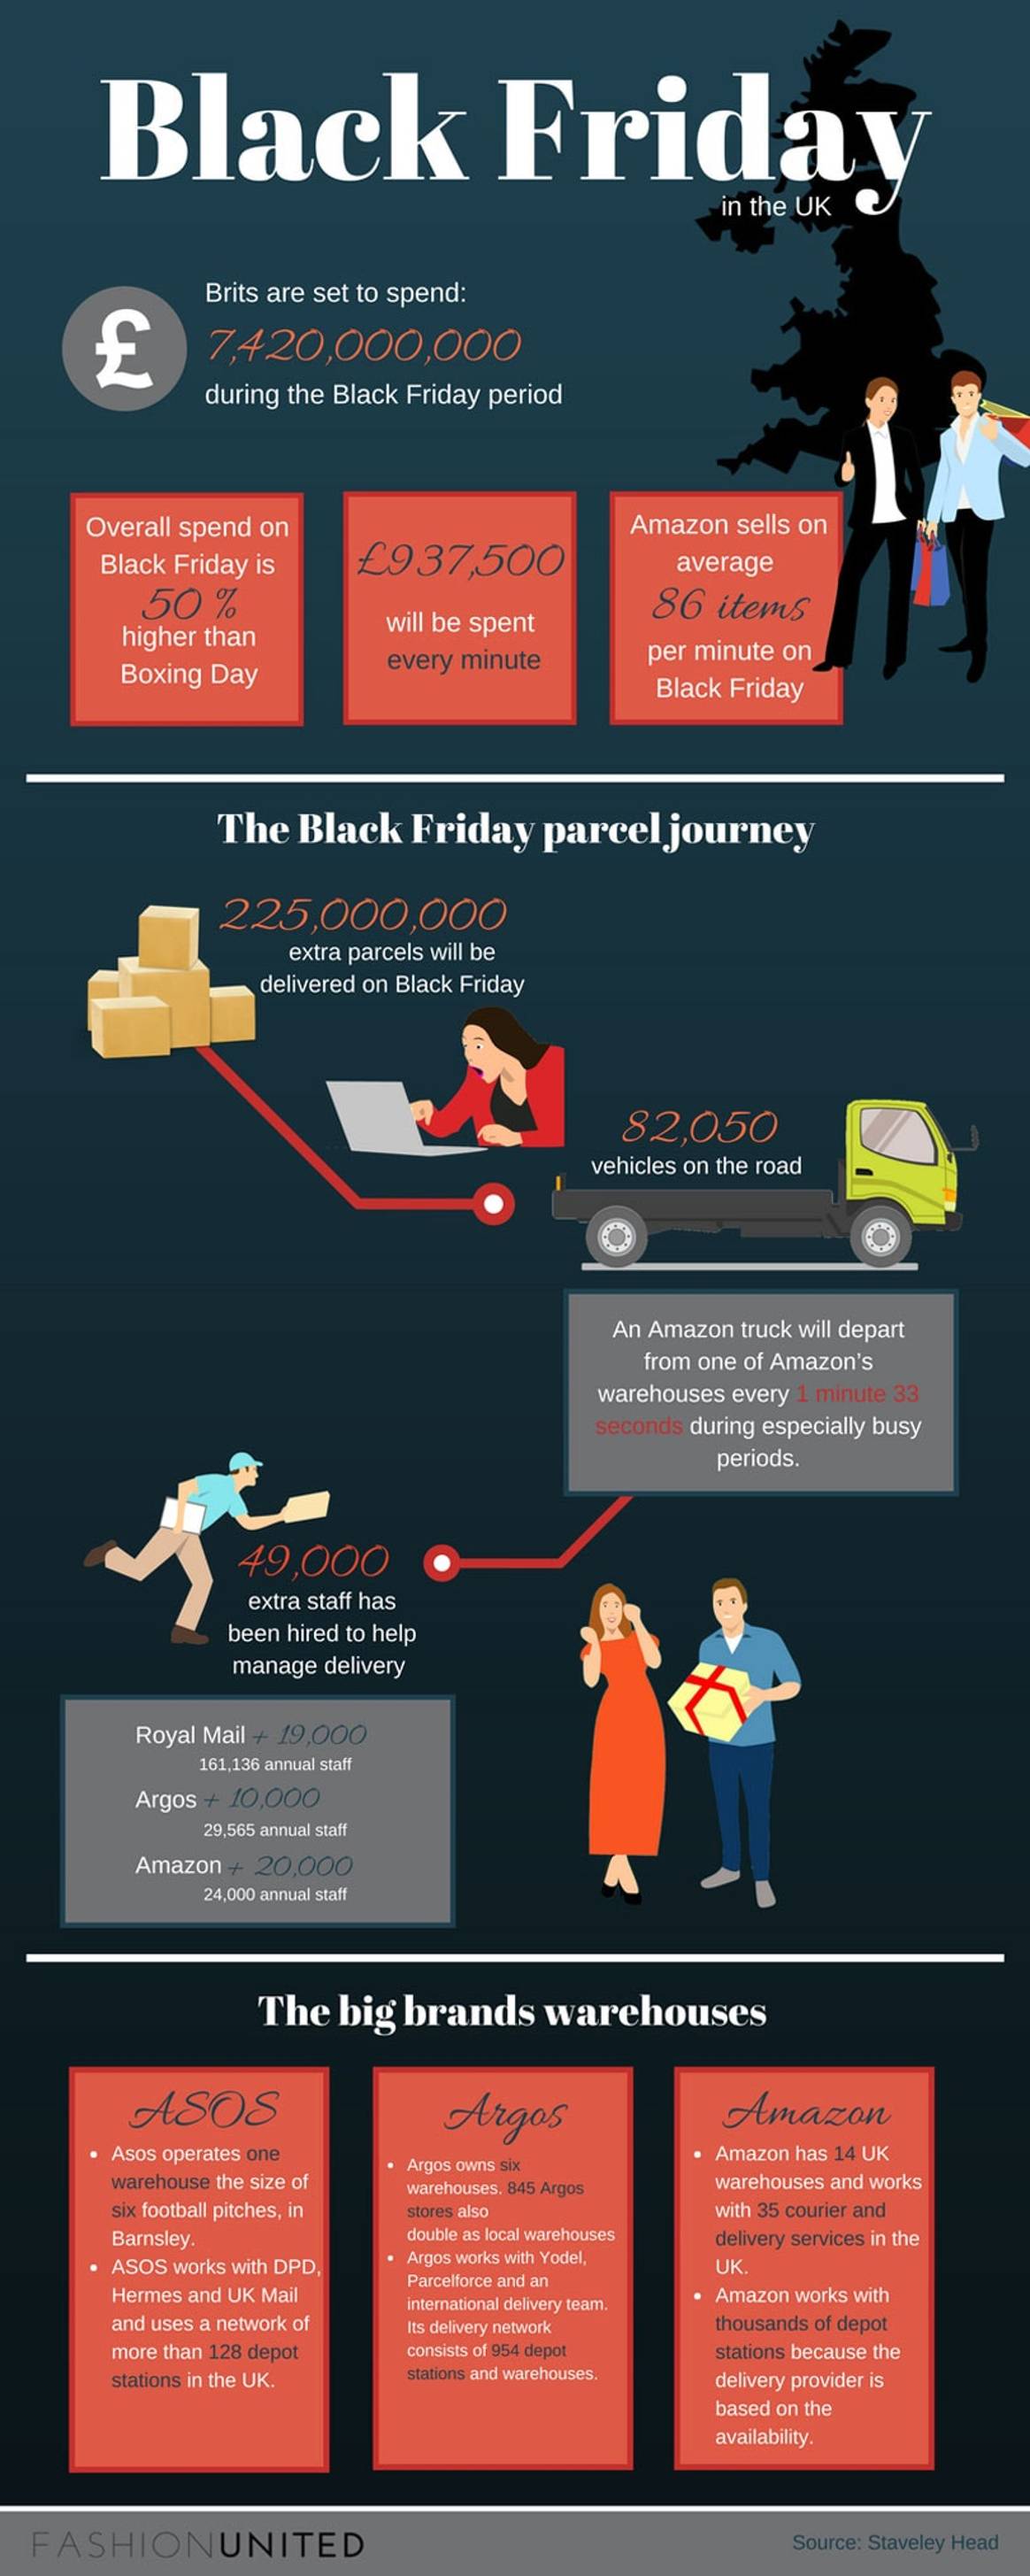 A sneak peek at the delivery logistics behind Black Friday